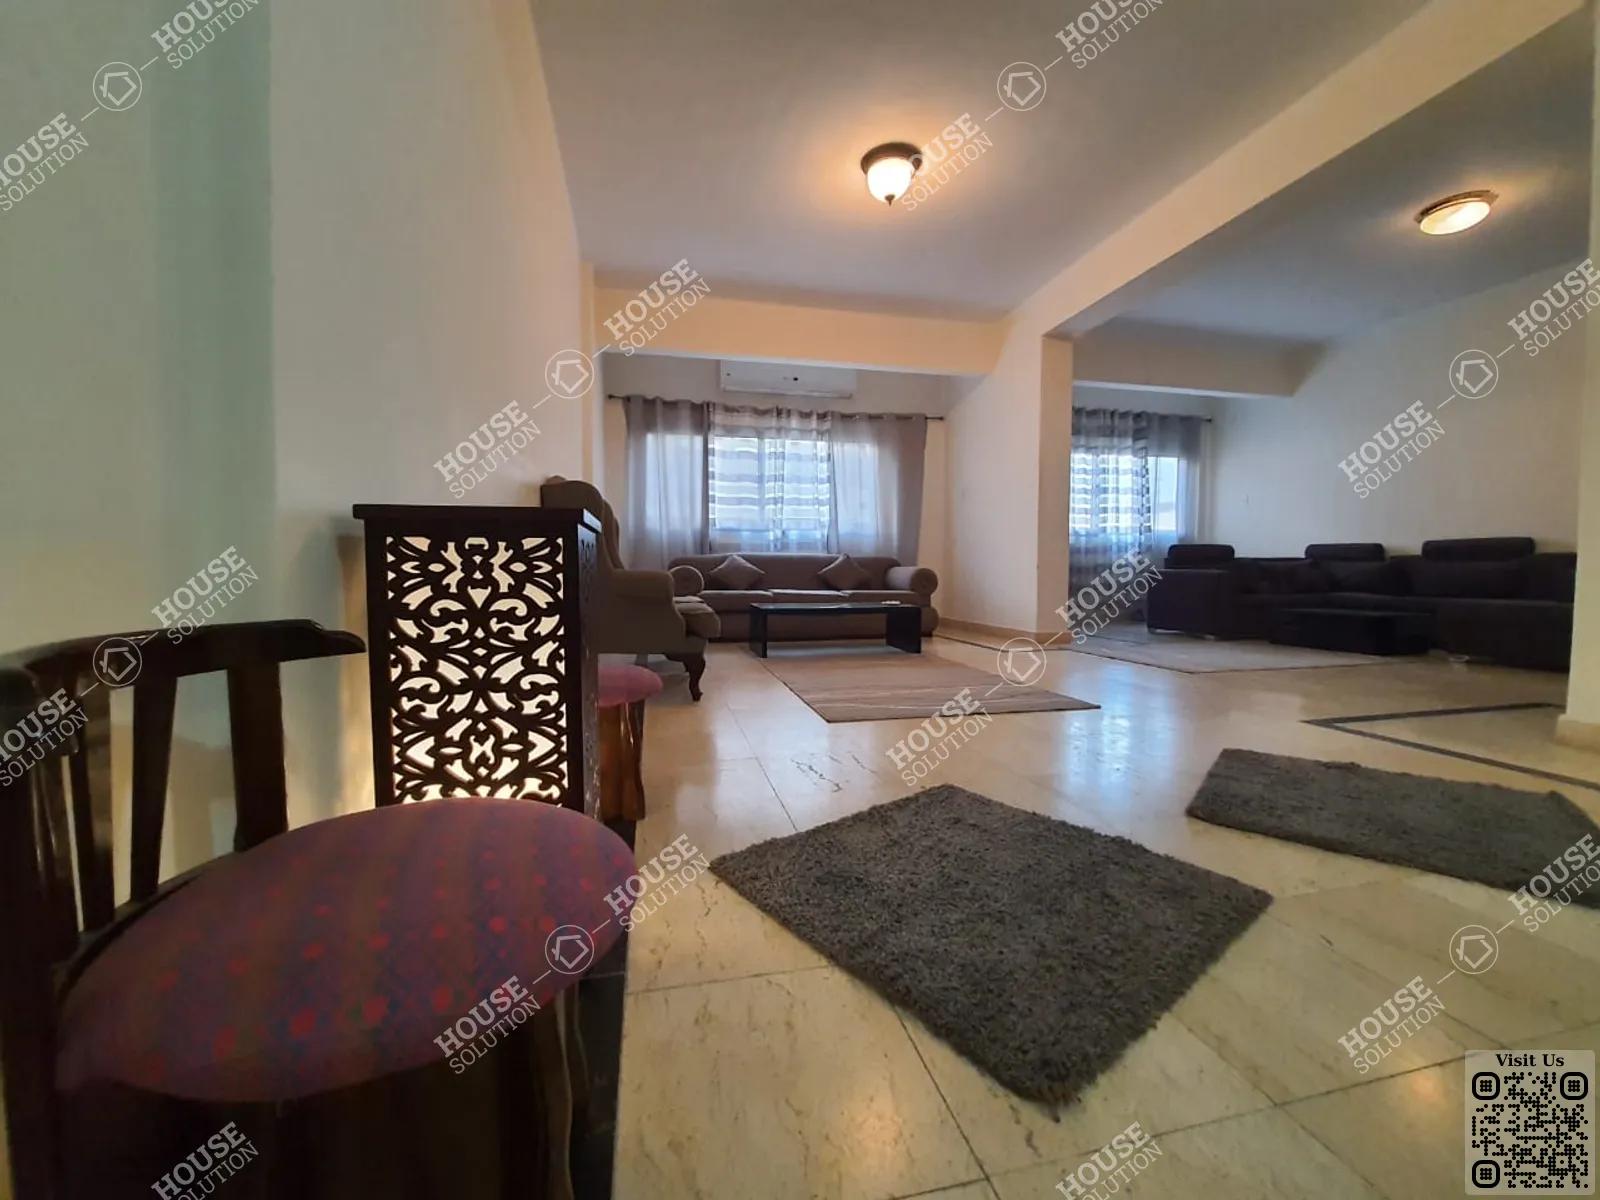 RECEPTION  @ Apartments For Rent In Maadi Maadi Sarayat Area: 150 m² consists of 2 Bedrooms 2 Bathrooms Furnished 5 stars #3527-0